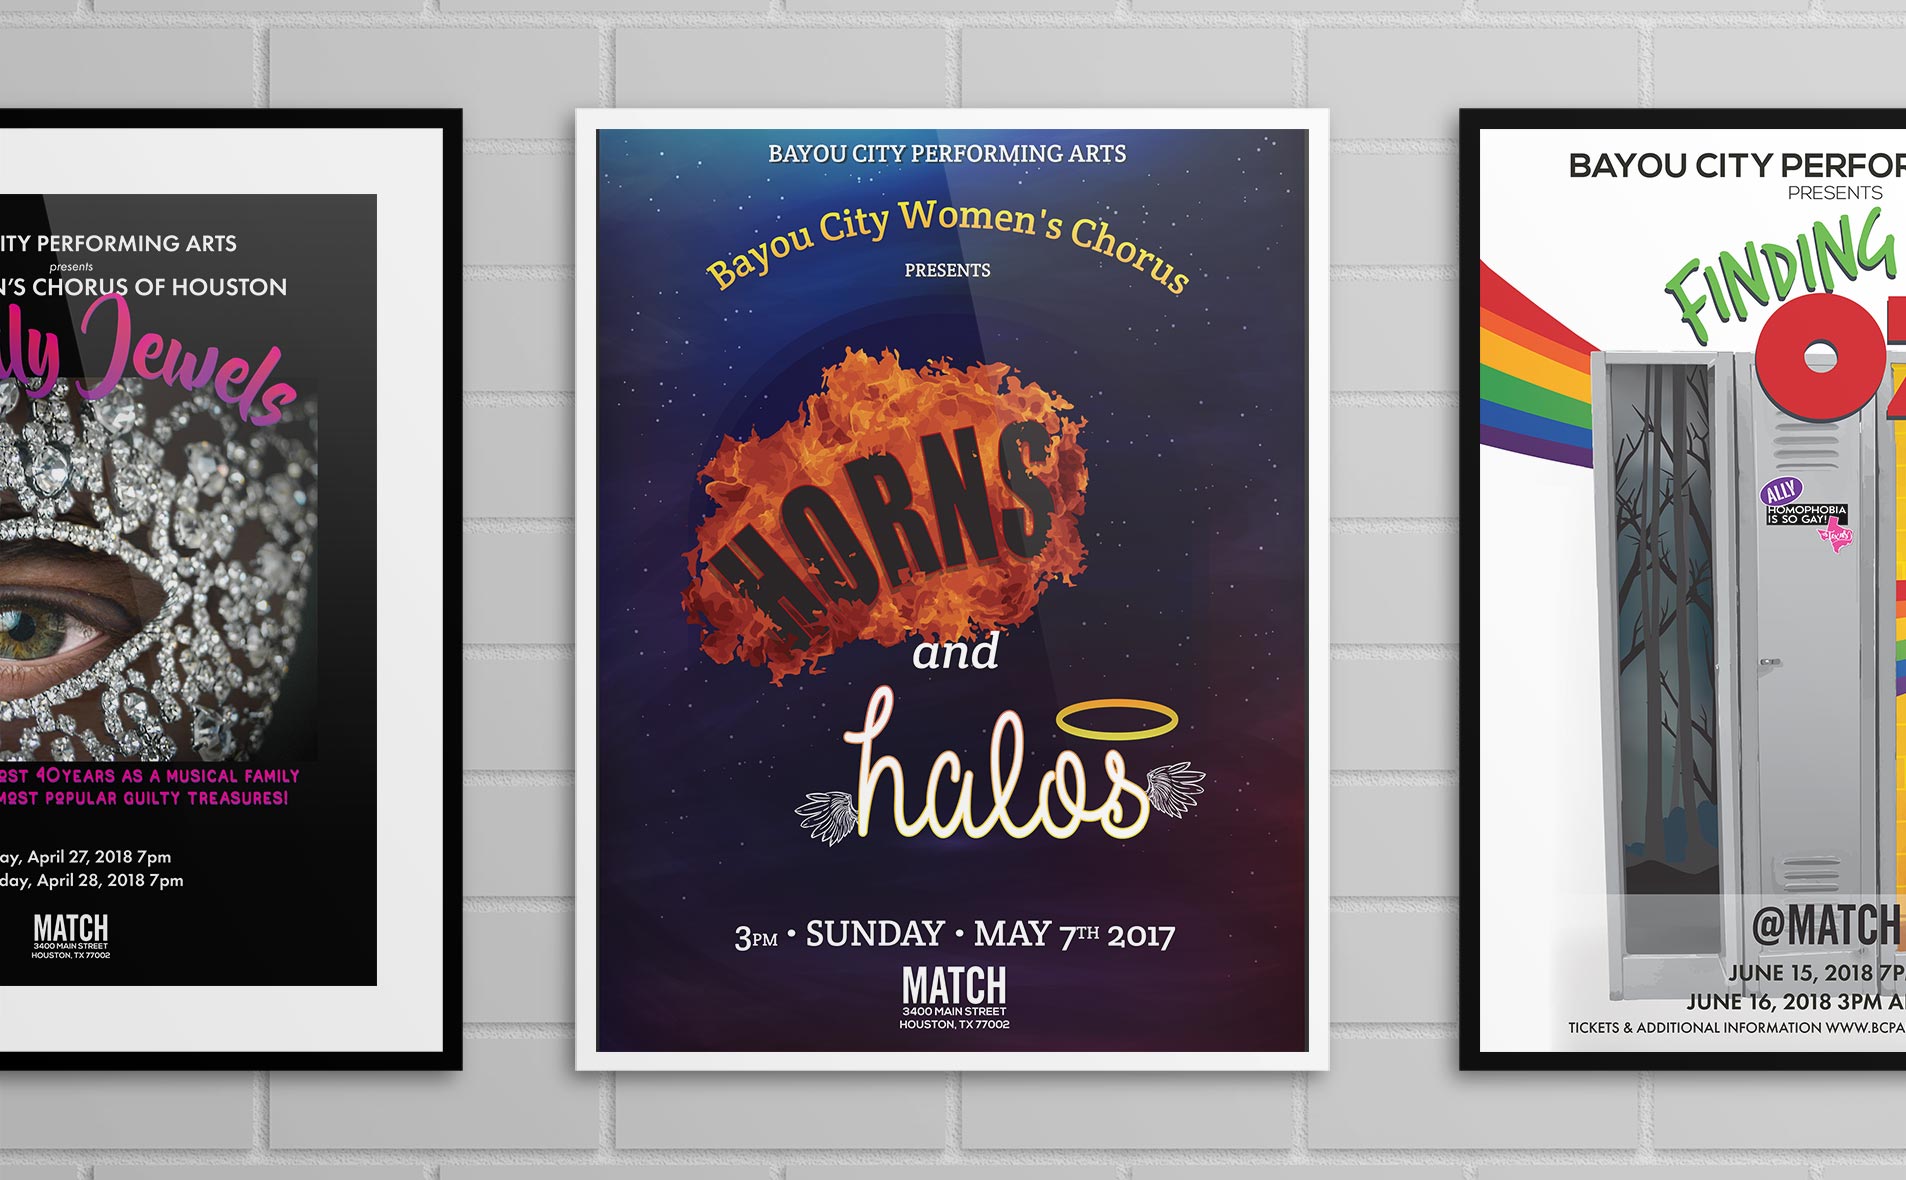 A collection of lobby posters advertising the BCPA chorus performances